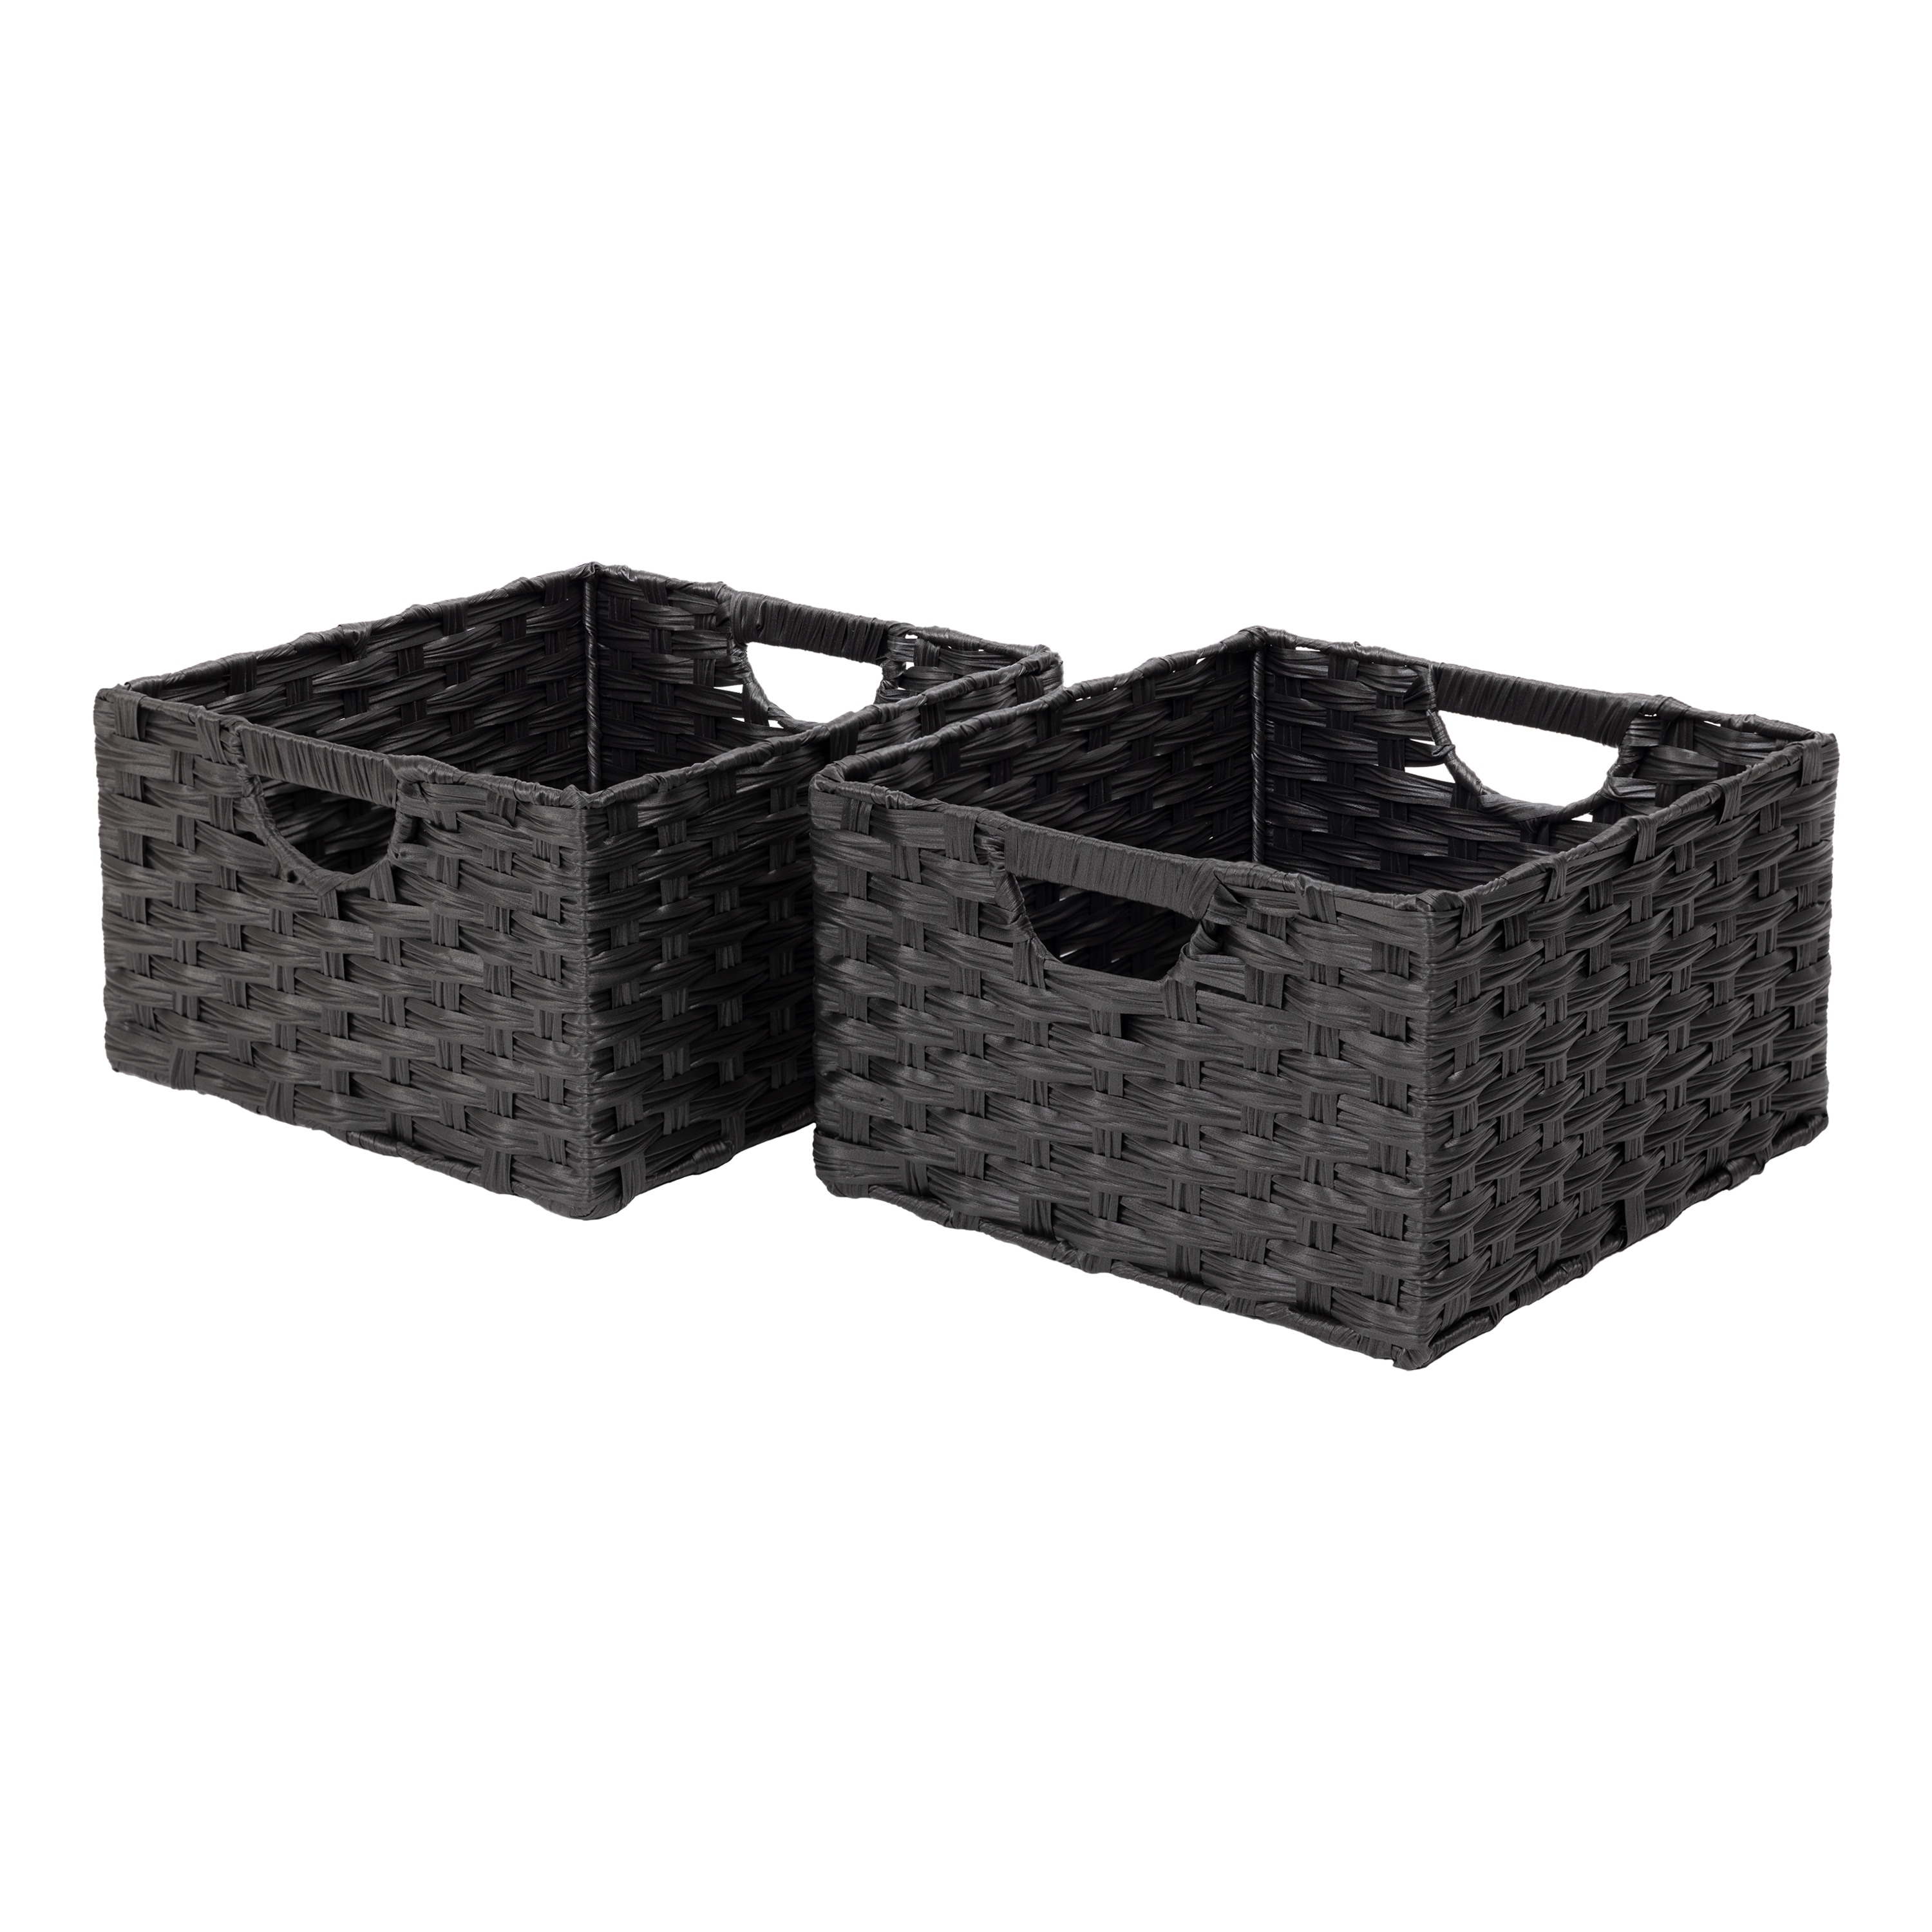 OLLVIA Foldable Storage Baskets for Shelves Set of 3, Fabric Storage Bins with Labels, Decorative Cloth Organizer Storage Boxes, Rectangle Closet